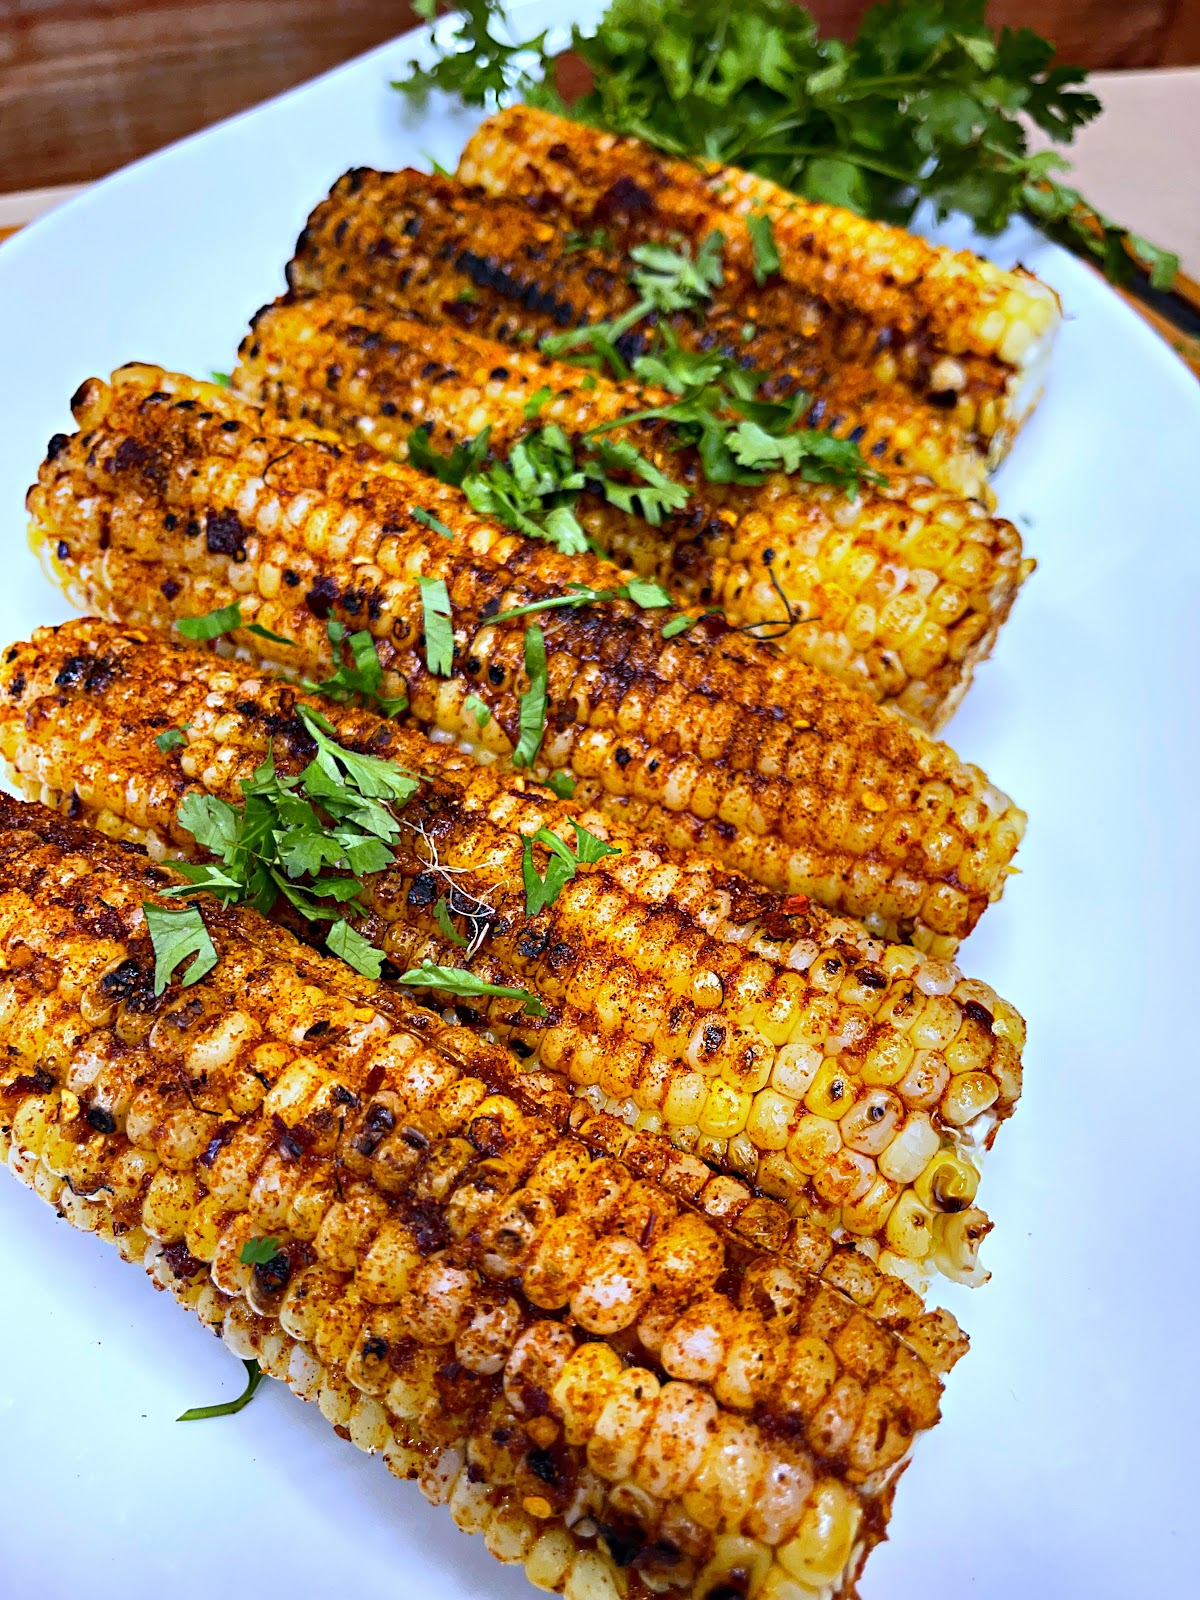 Nicely charred sweet corn ready for a taste